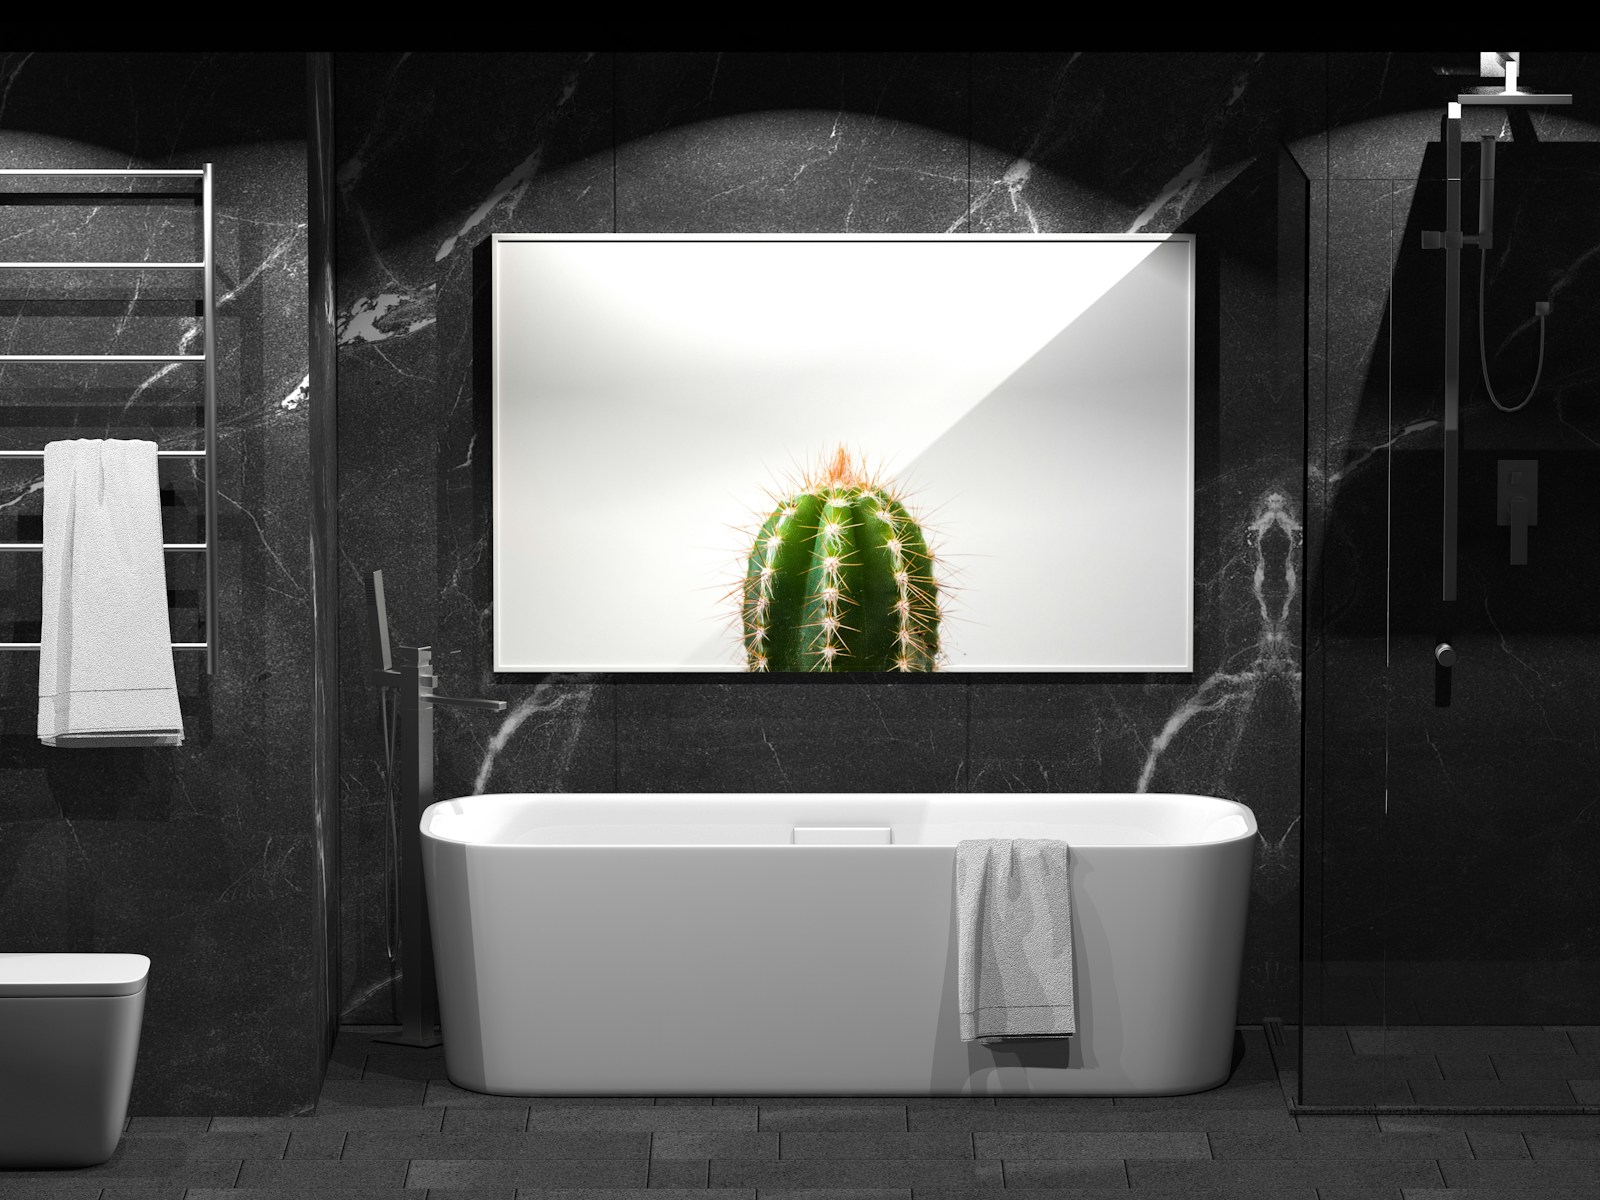 a bathroom with a cactus in the mirror